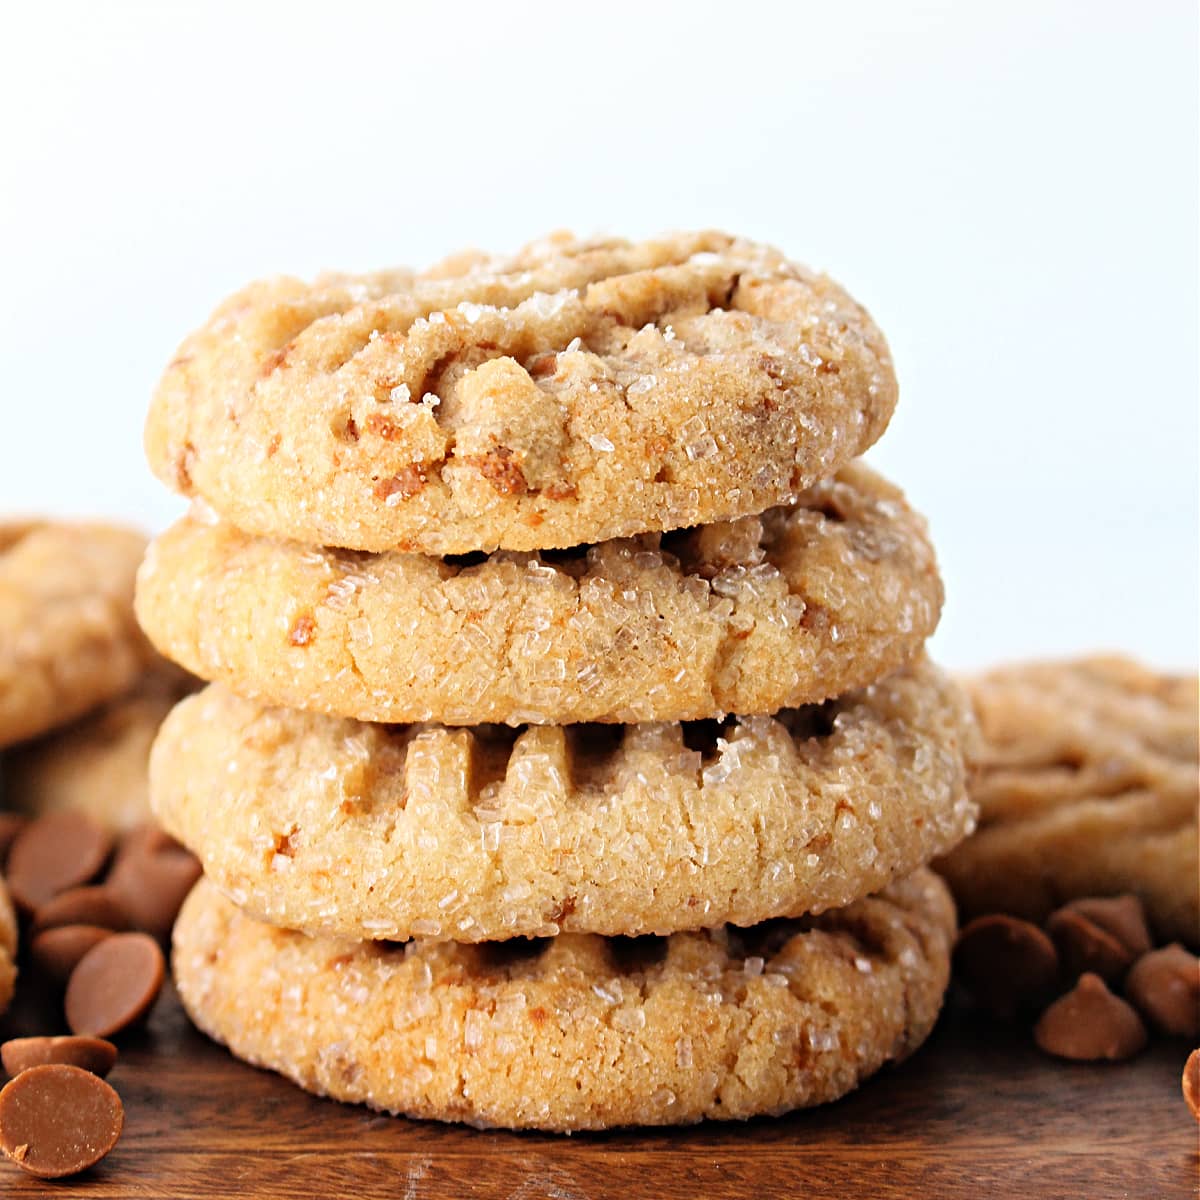 Closeup of stack of cookies showing thick edges and sparkling sugar coating.